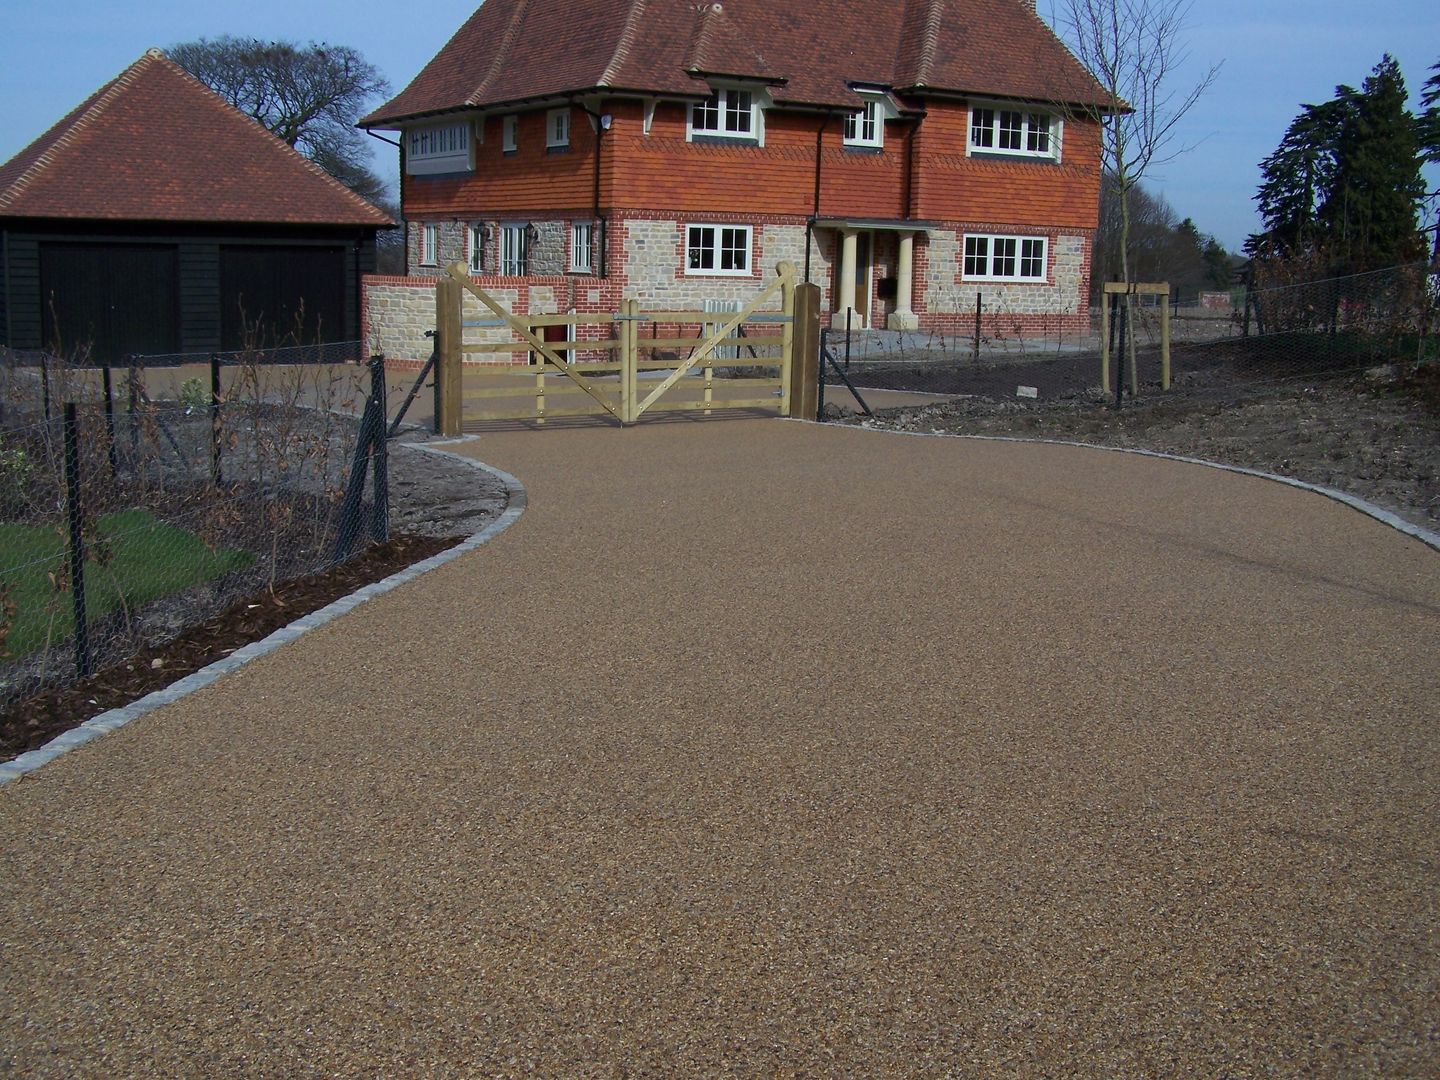 Domestic Driveways installation of resin bound paving, Permeable Paving Solutions UK Permeable Paving Solutions UK Murs & Sols rustiques